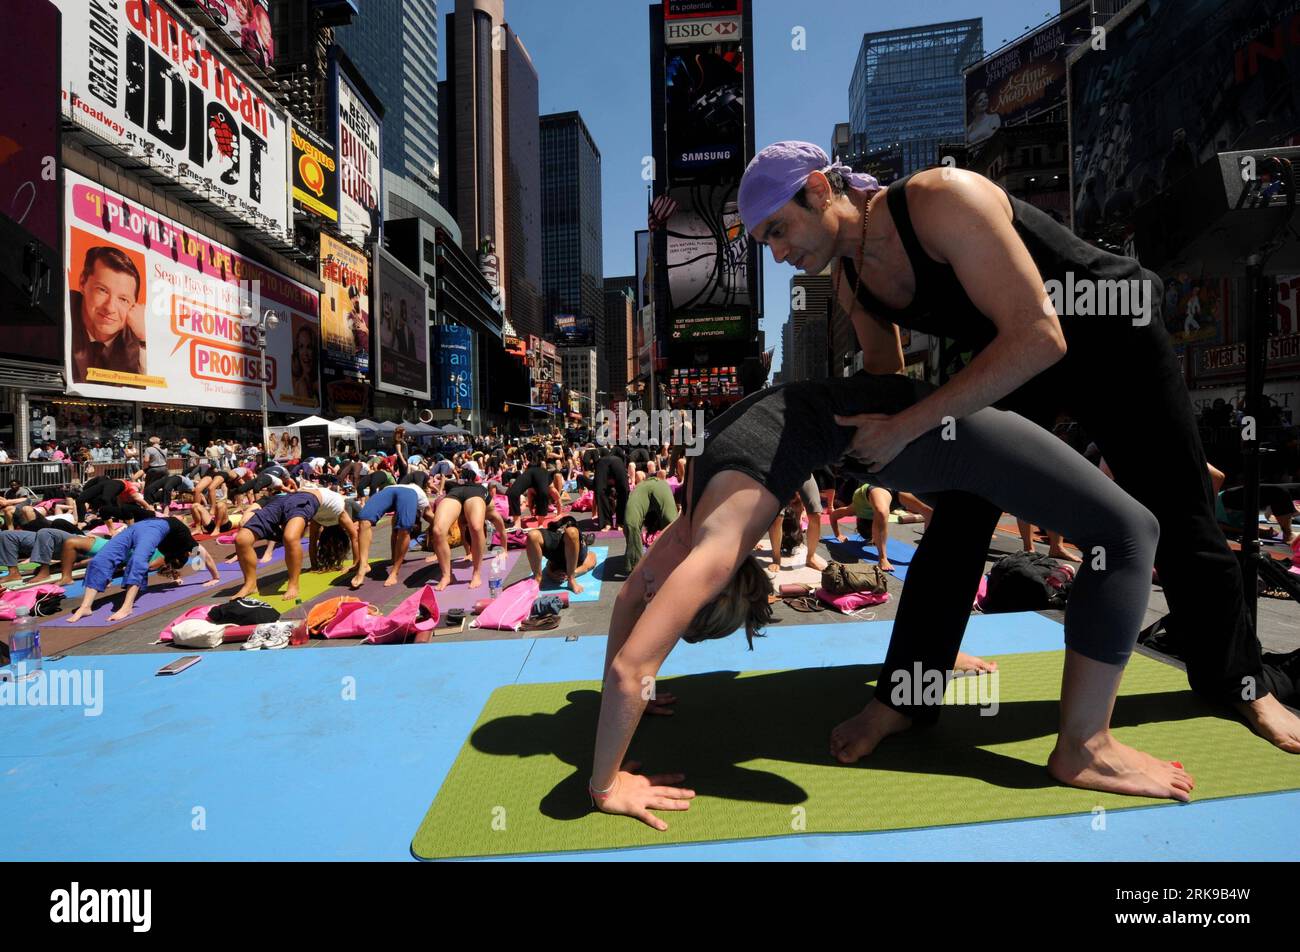 Bildnummer: 54158705  Datum: 21.06.2010  Copyright: imago/Xinhua (100621) -- NEW YORK, June 21, 2010 (Xinhua) -- Yoga enthusiasts practise yoga on the morning of the summer solstice at Times Square in New York, the United States, June 21, 2010. Thousands of yoga enthusiasts got together during the eighth annual Solstice in Times Square event to celebrate the longest day of the year. (Xinhua/Shen Hong) (zw) (17)U.S.-NEW YORK-TIMES SQUARE-YOGA PUBLICATIONxNOTxINxCHN Gesellschaft Freizeitsport Yoga Sommersonnenwende kurios premiumd xint kbdig xsp 2010 quer  o0 Sonnenwende, Sonnwendfeier Körperkul Stock Photo